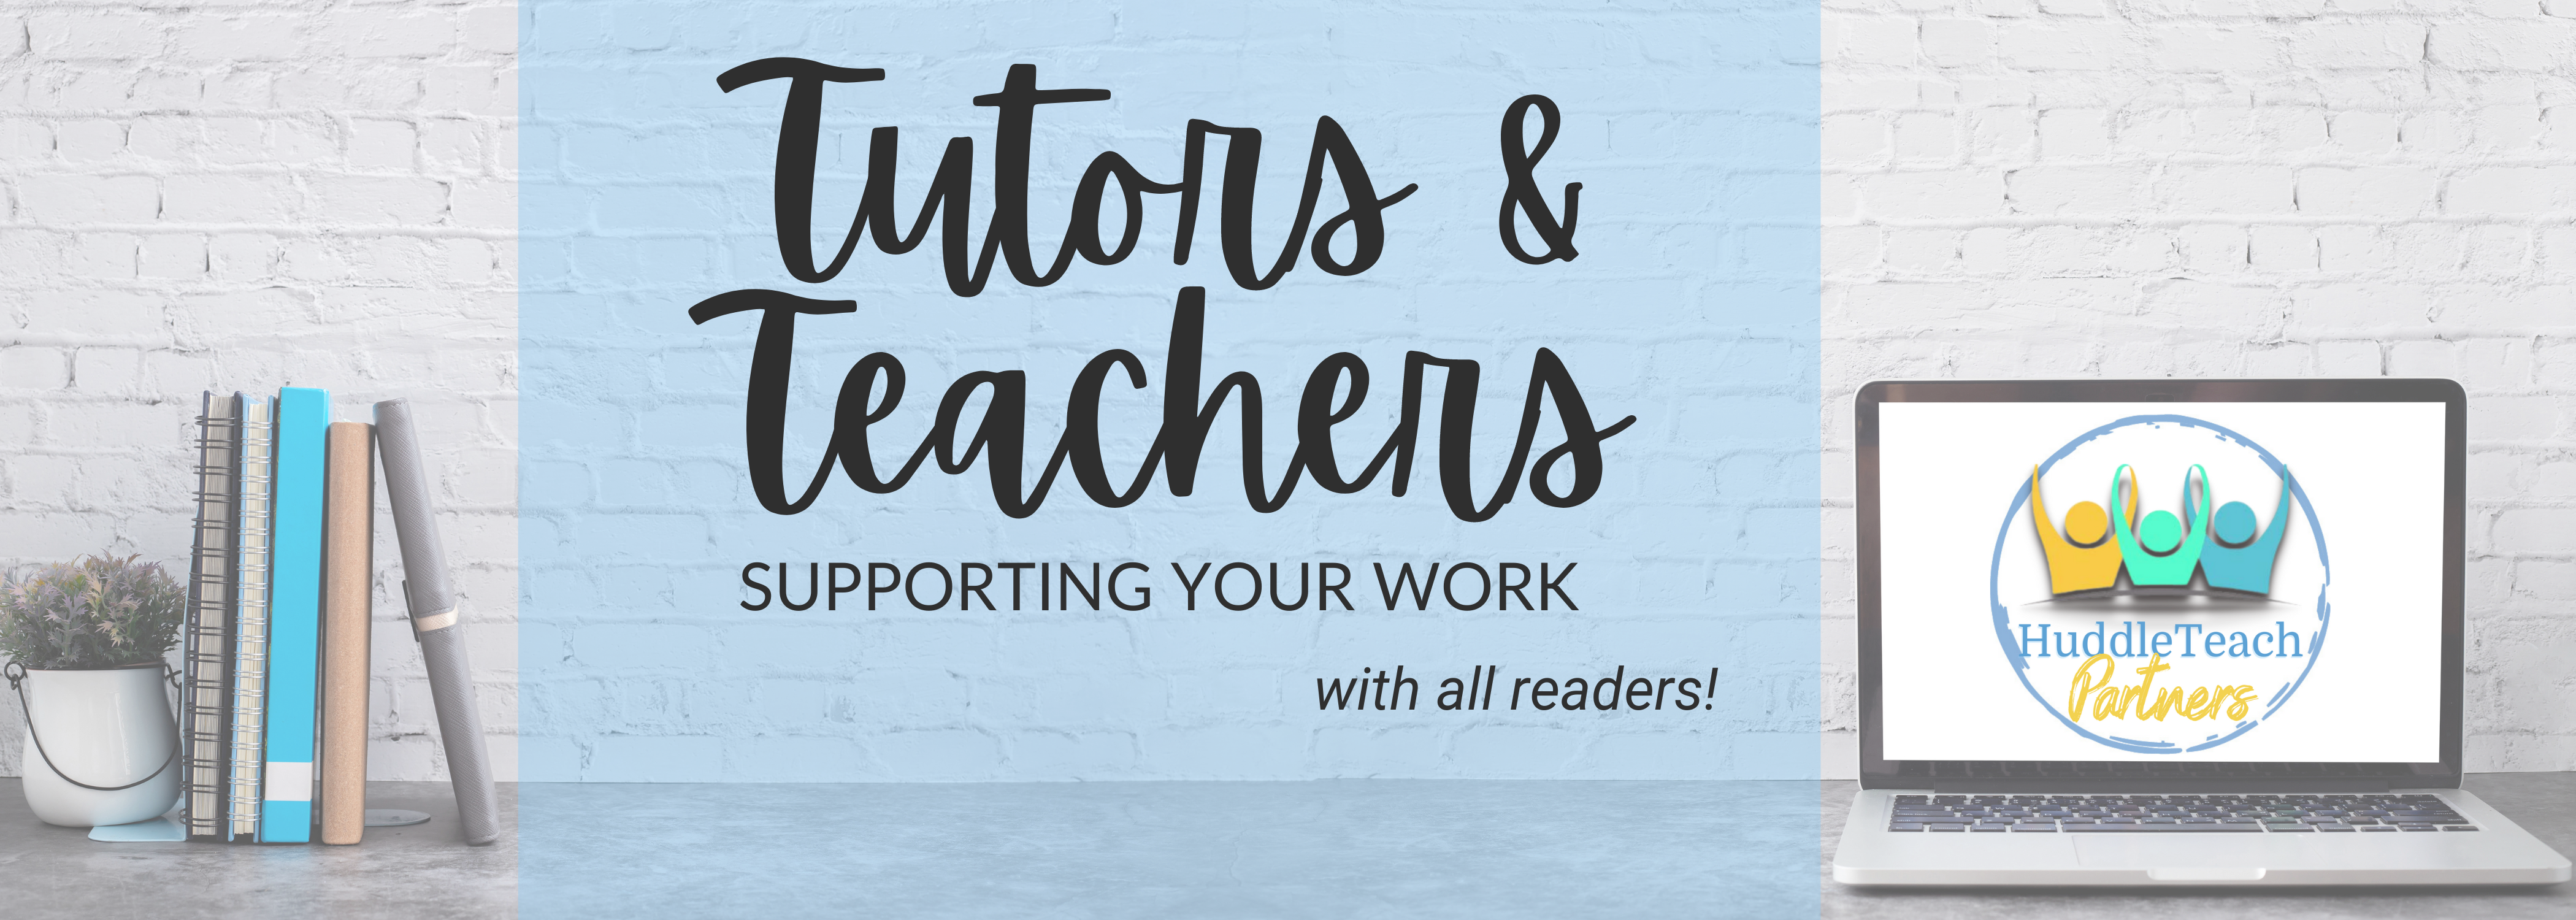 Decorative banner for tutors and teachers consulting